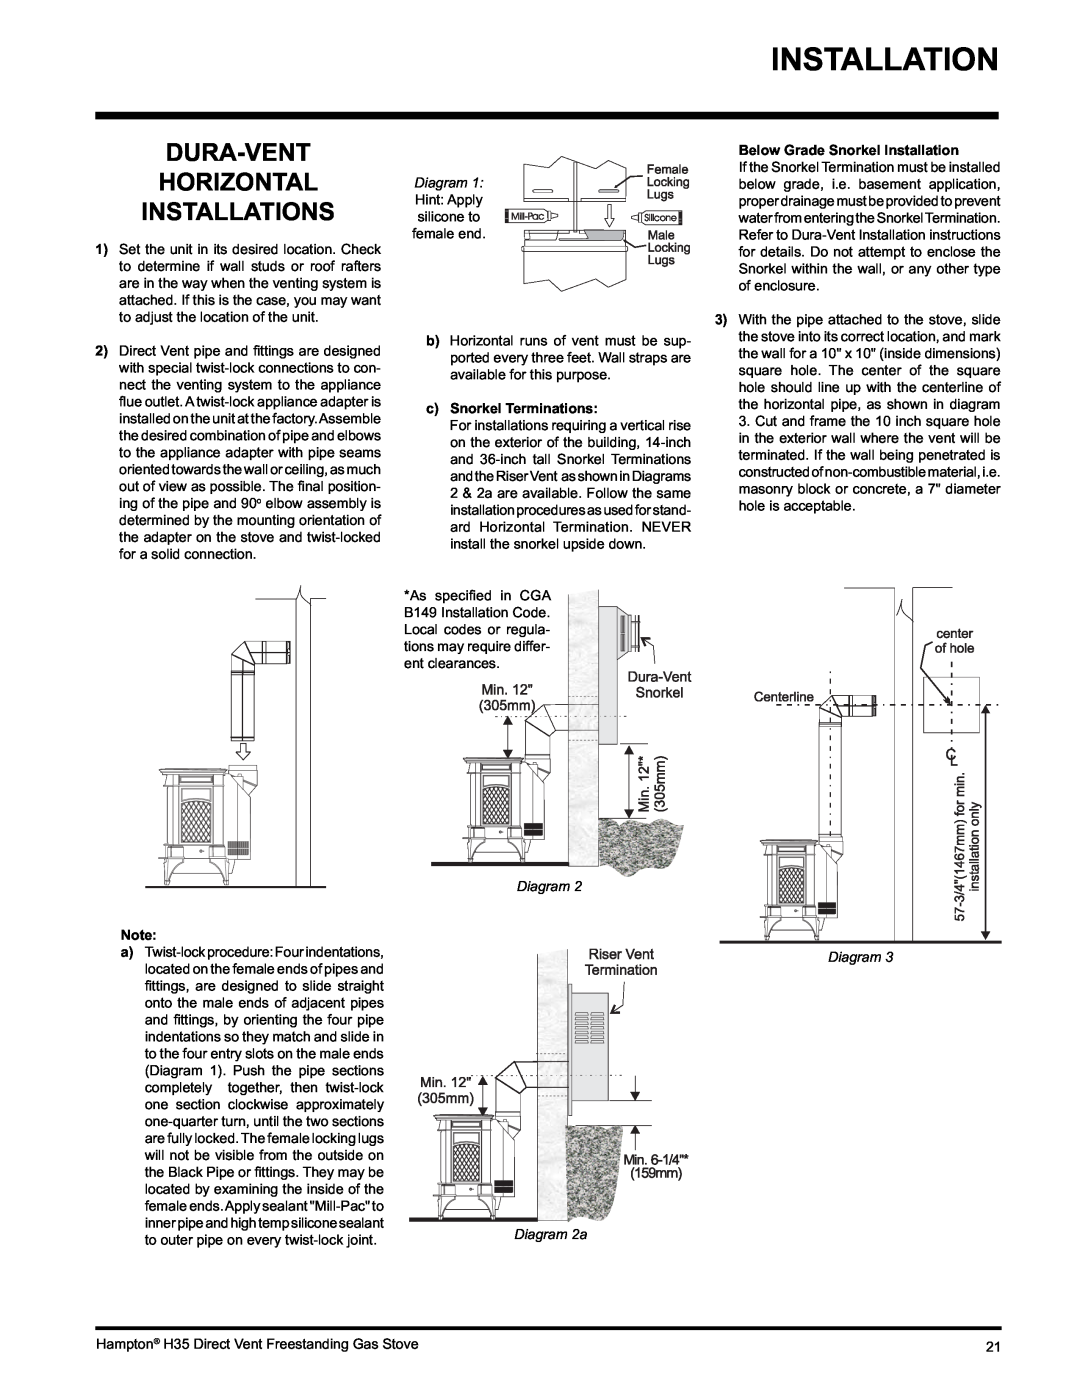 Hampton Direct H35-LP1, H35-NG1 Dura-Vent Horizontal Installations, Diagram 1 Hint Apply silicone to female end 